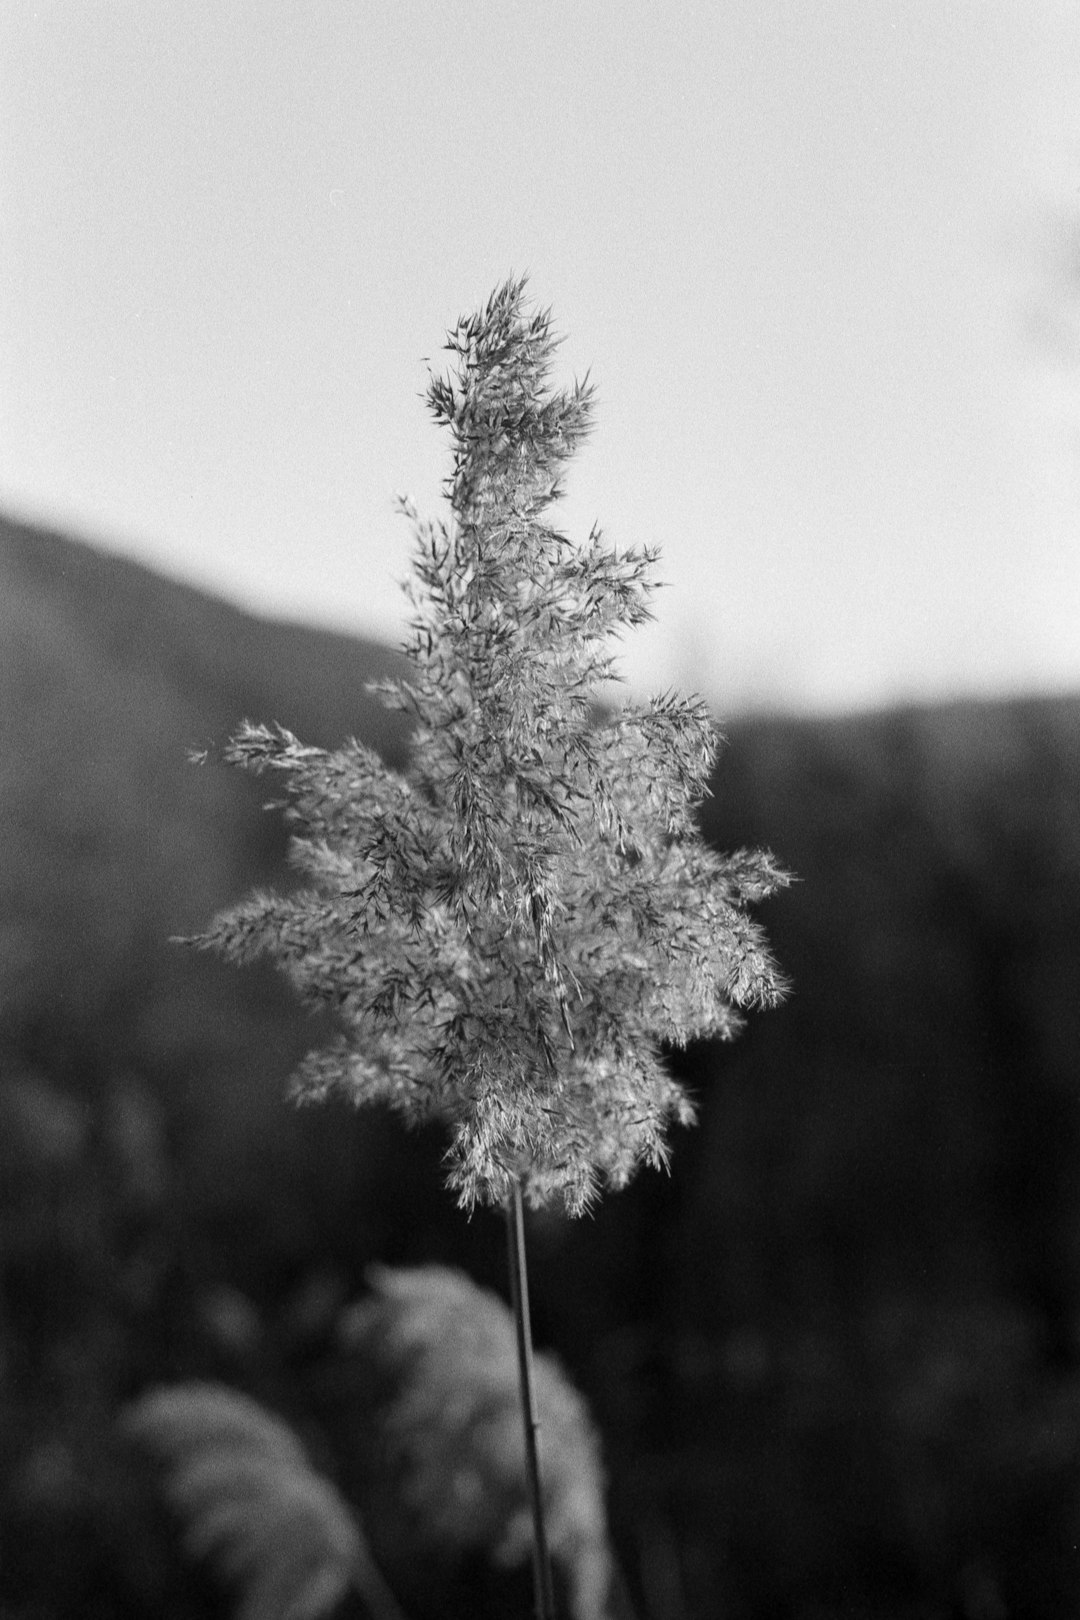 grayscale photo of plant